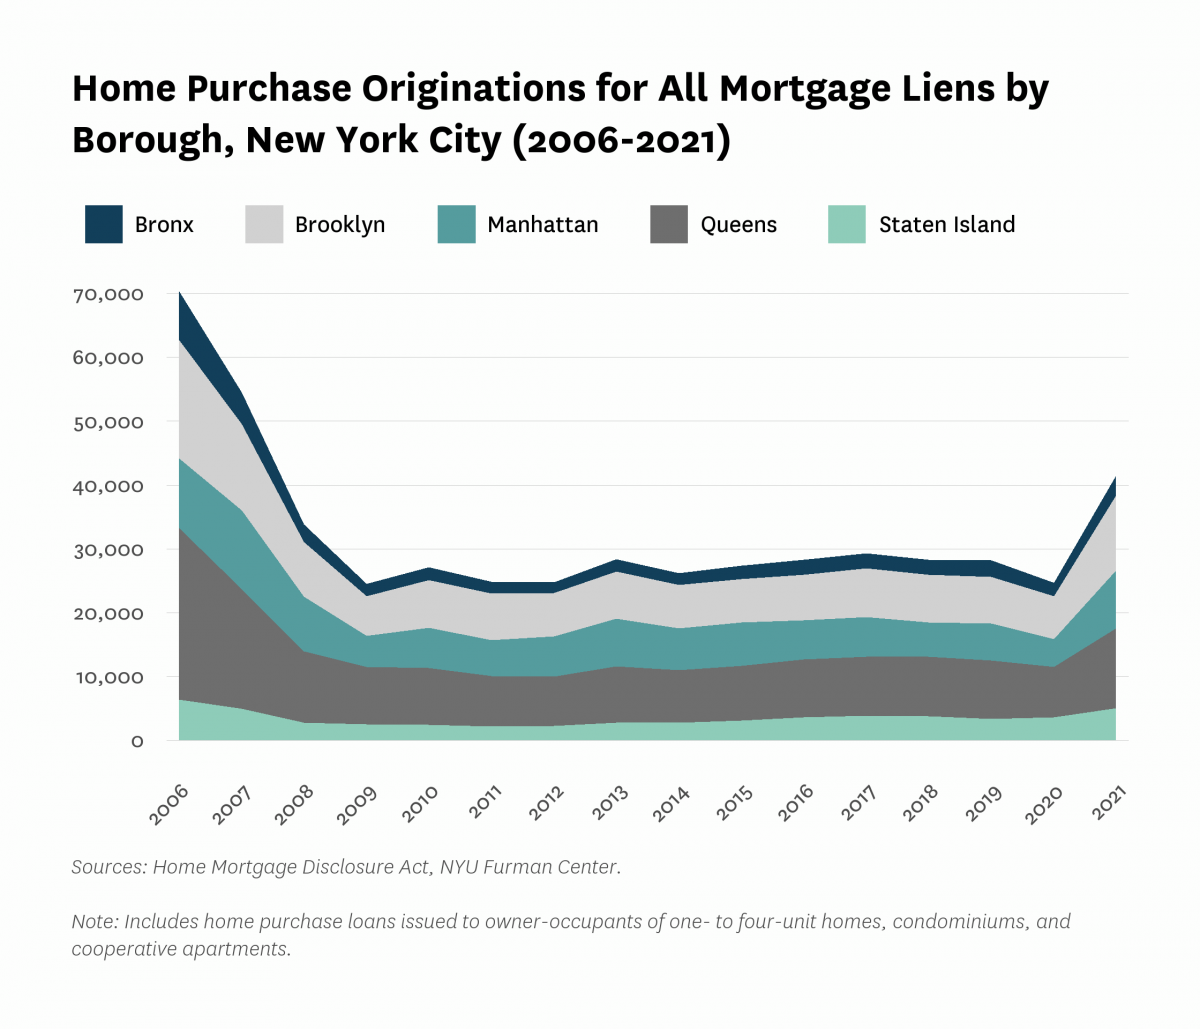 Area chart showing home purchase originations for all mortgage liens by borough in New York City from 2006 to 2021.